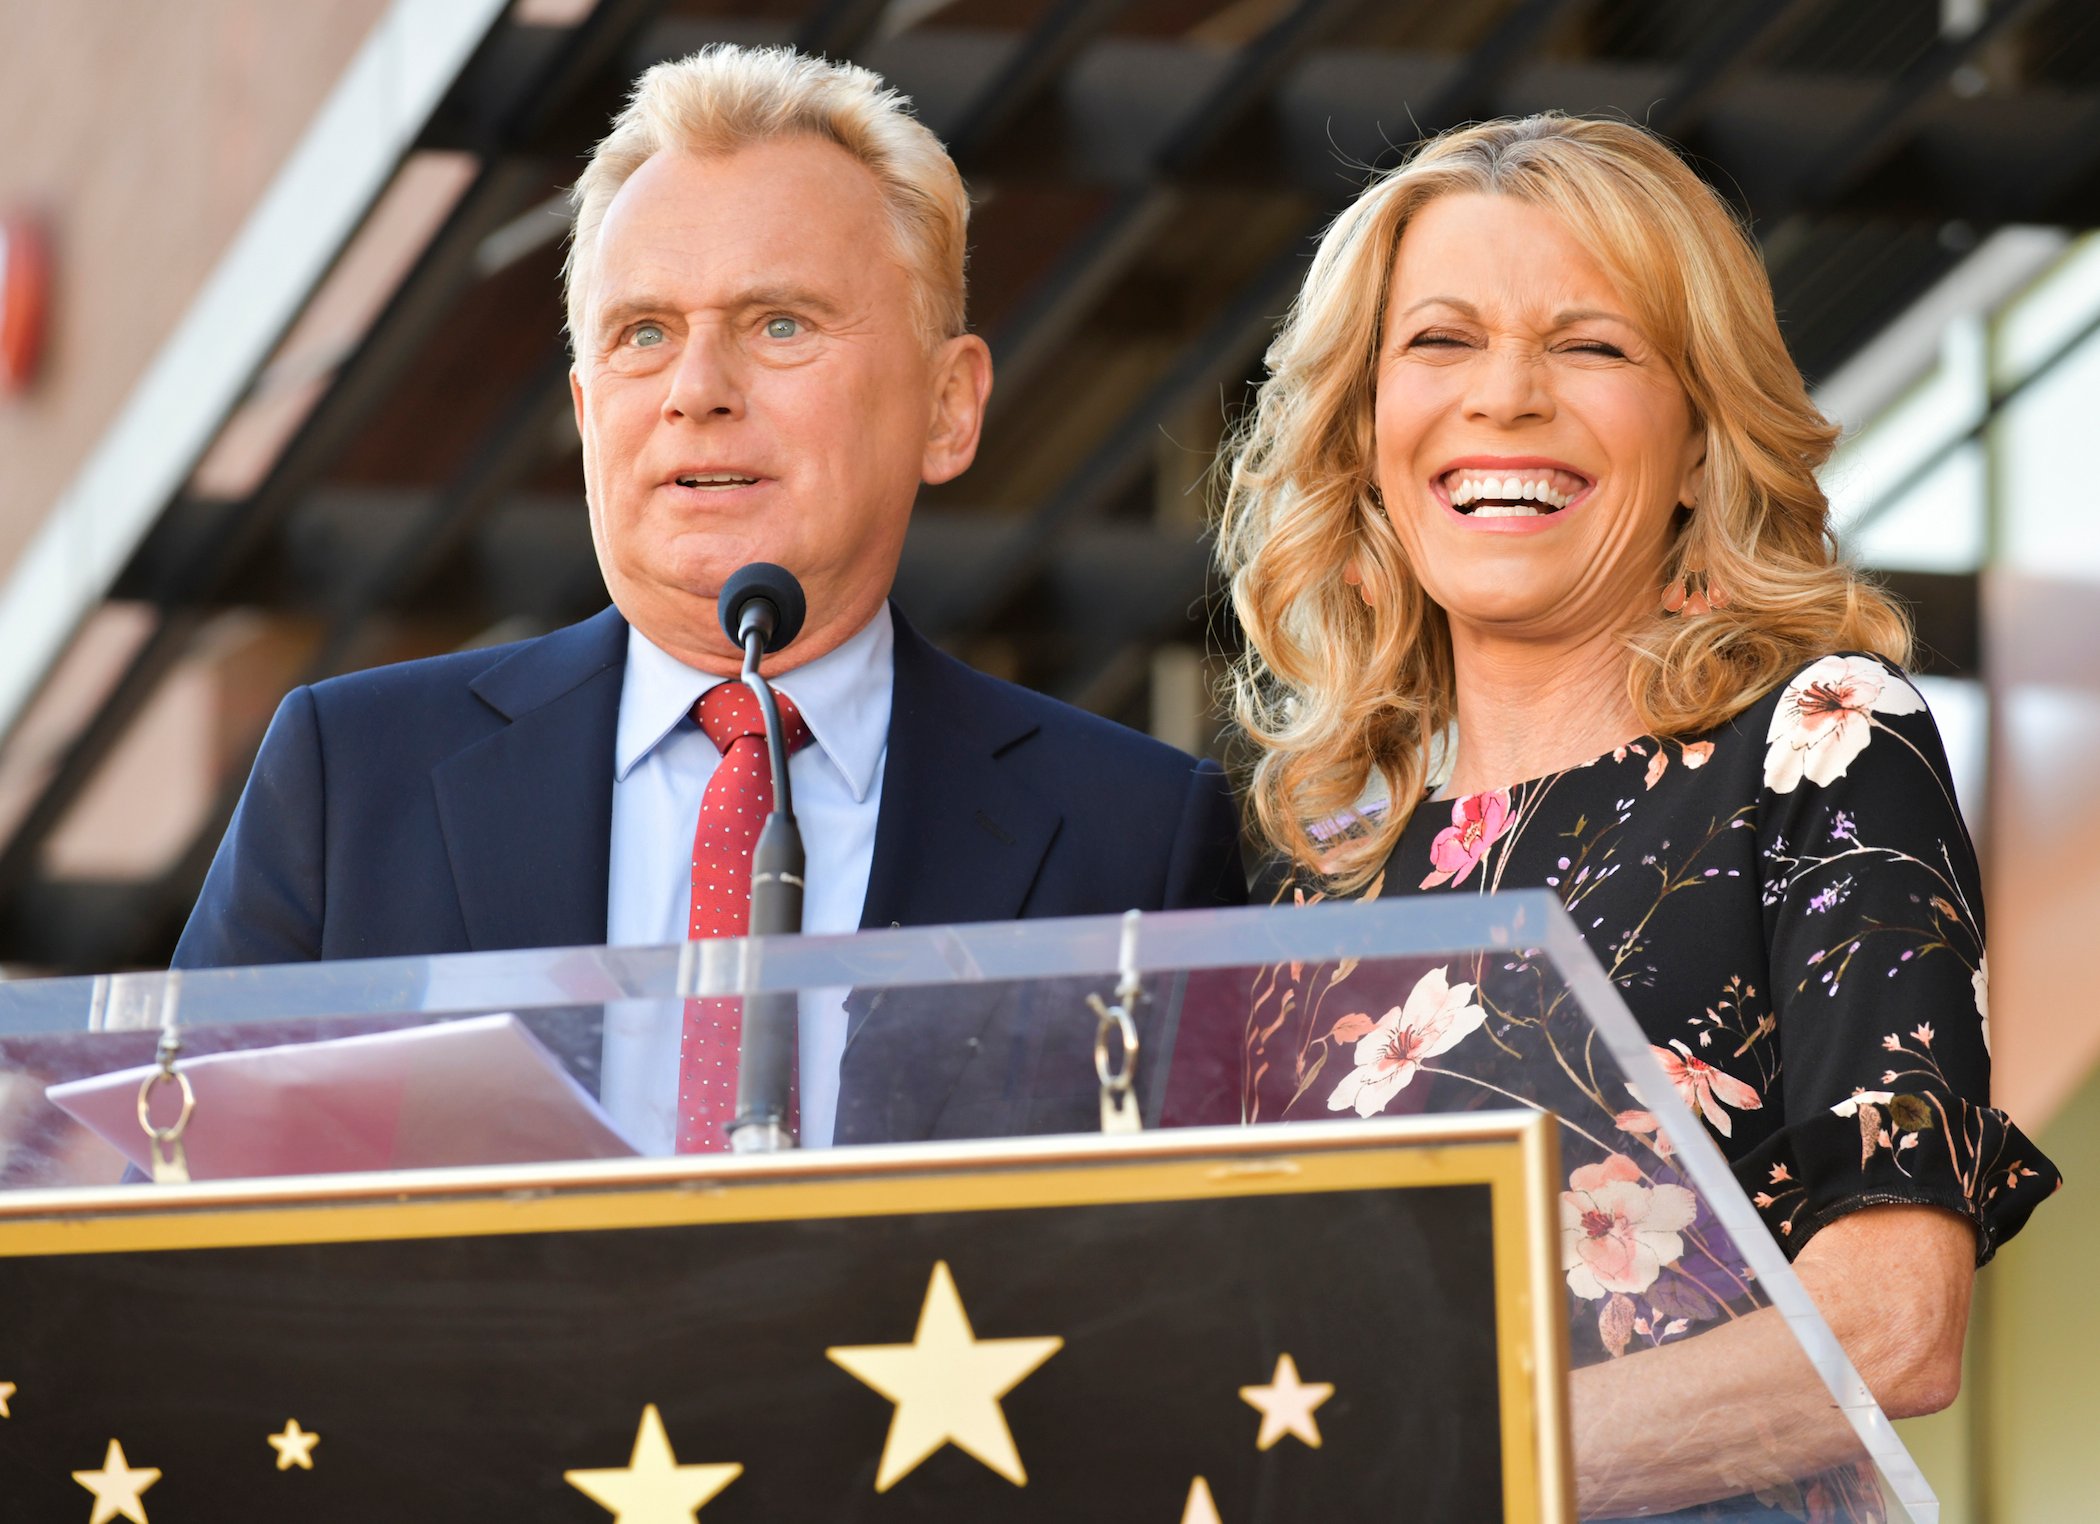 Pat Sajak and Vanna White from 'Wheel of Fortune' smiling at the Hollywood Walk of Fame